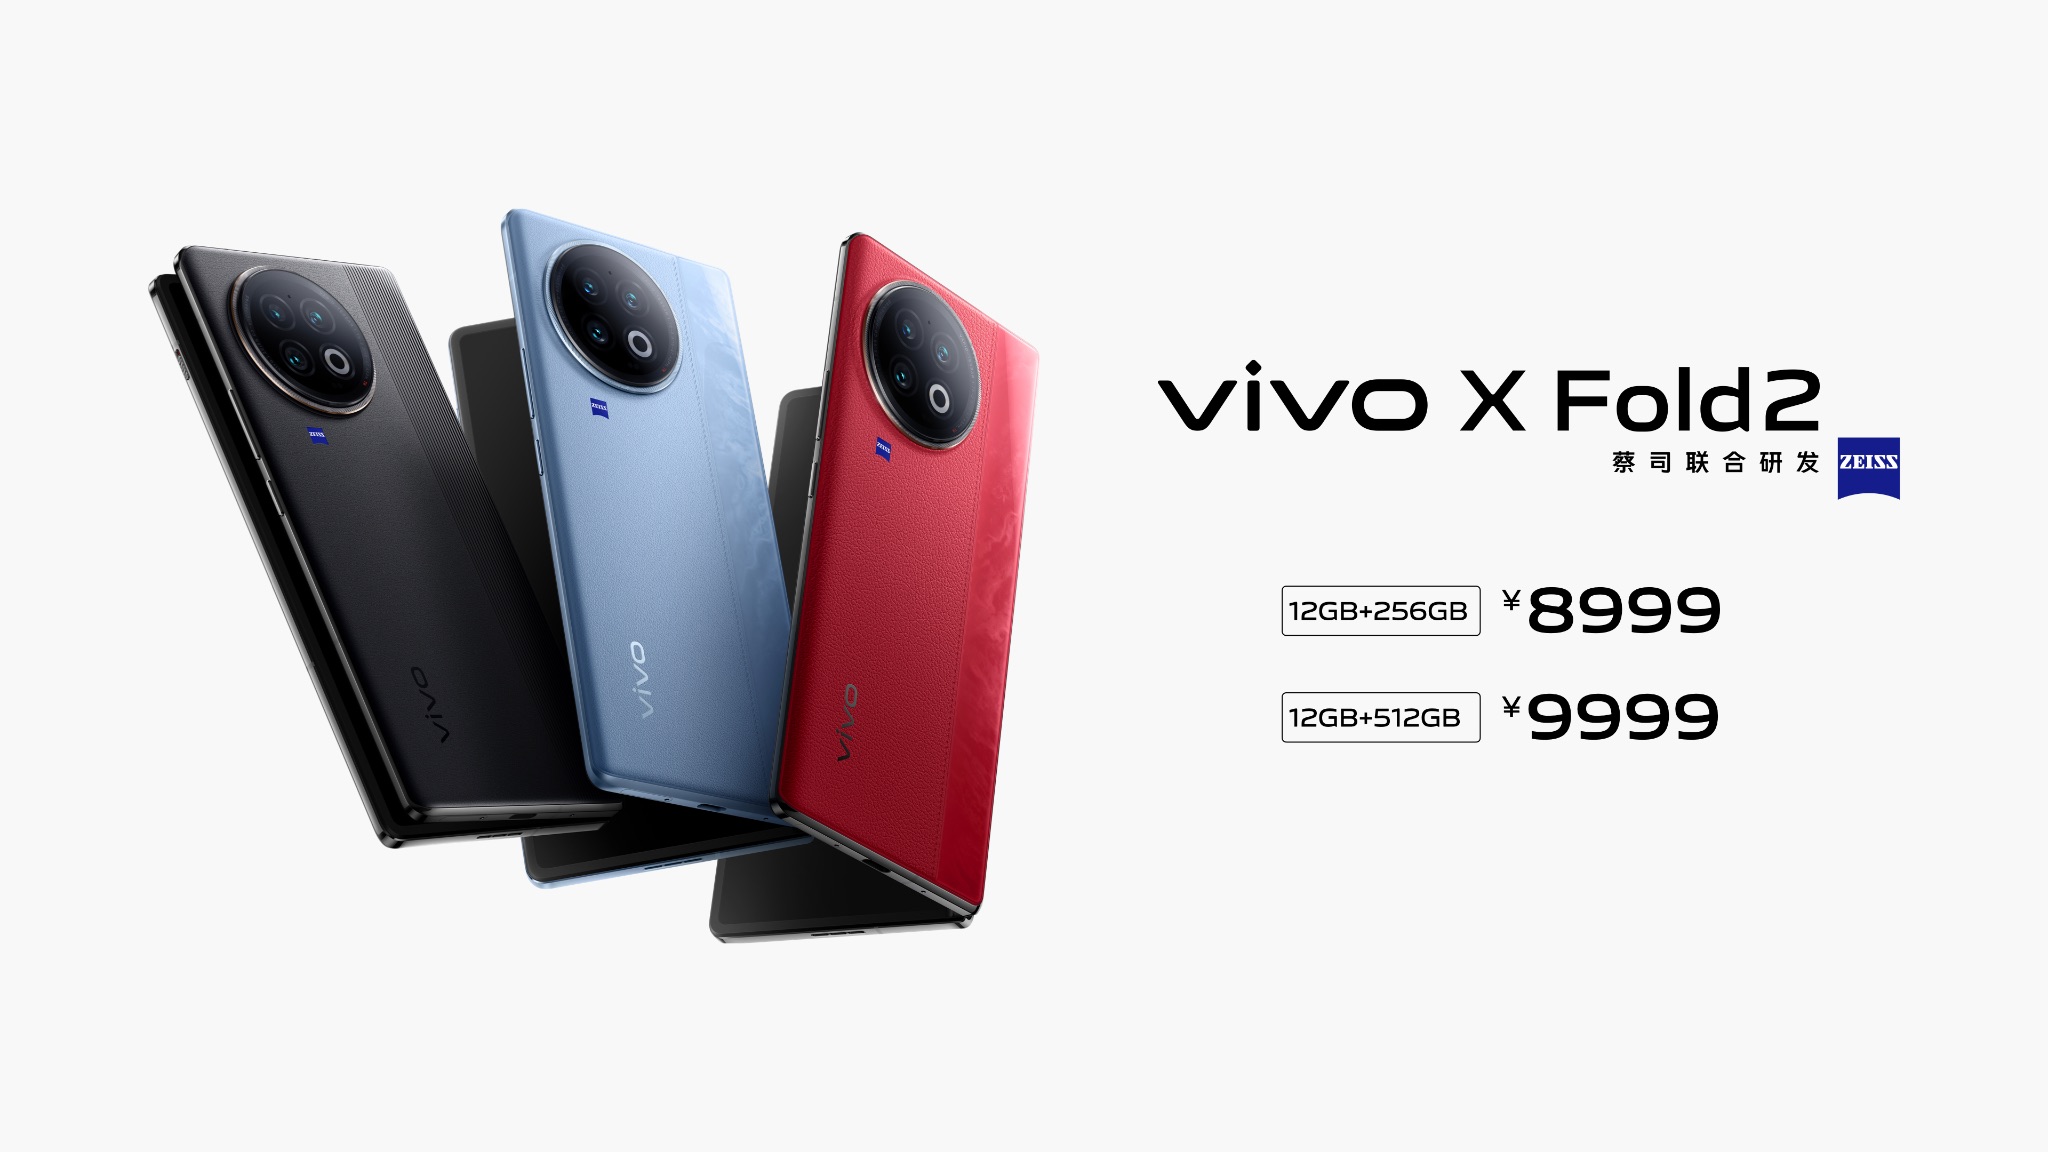 Vivo increased its momentum in foldable phone market with new